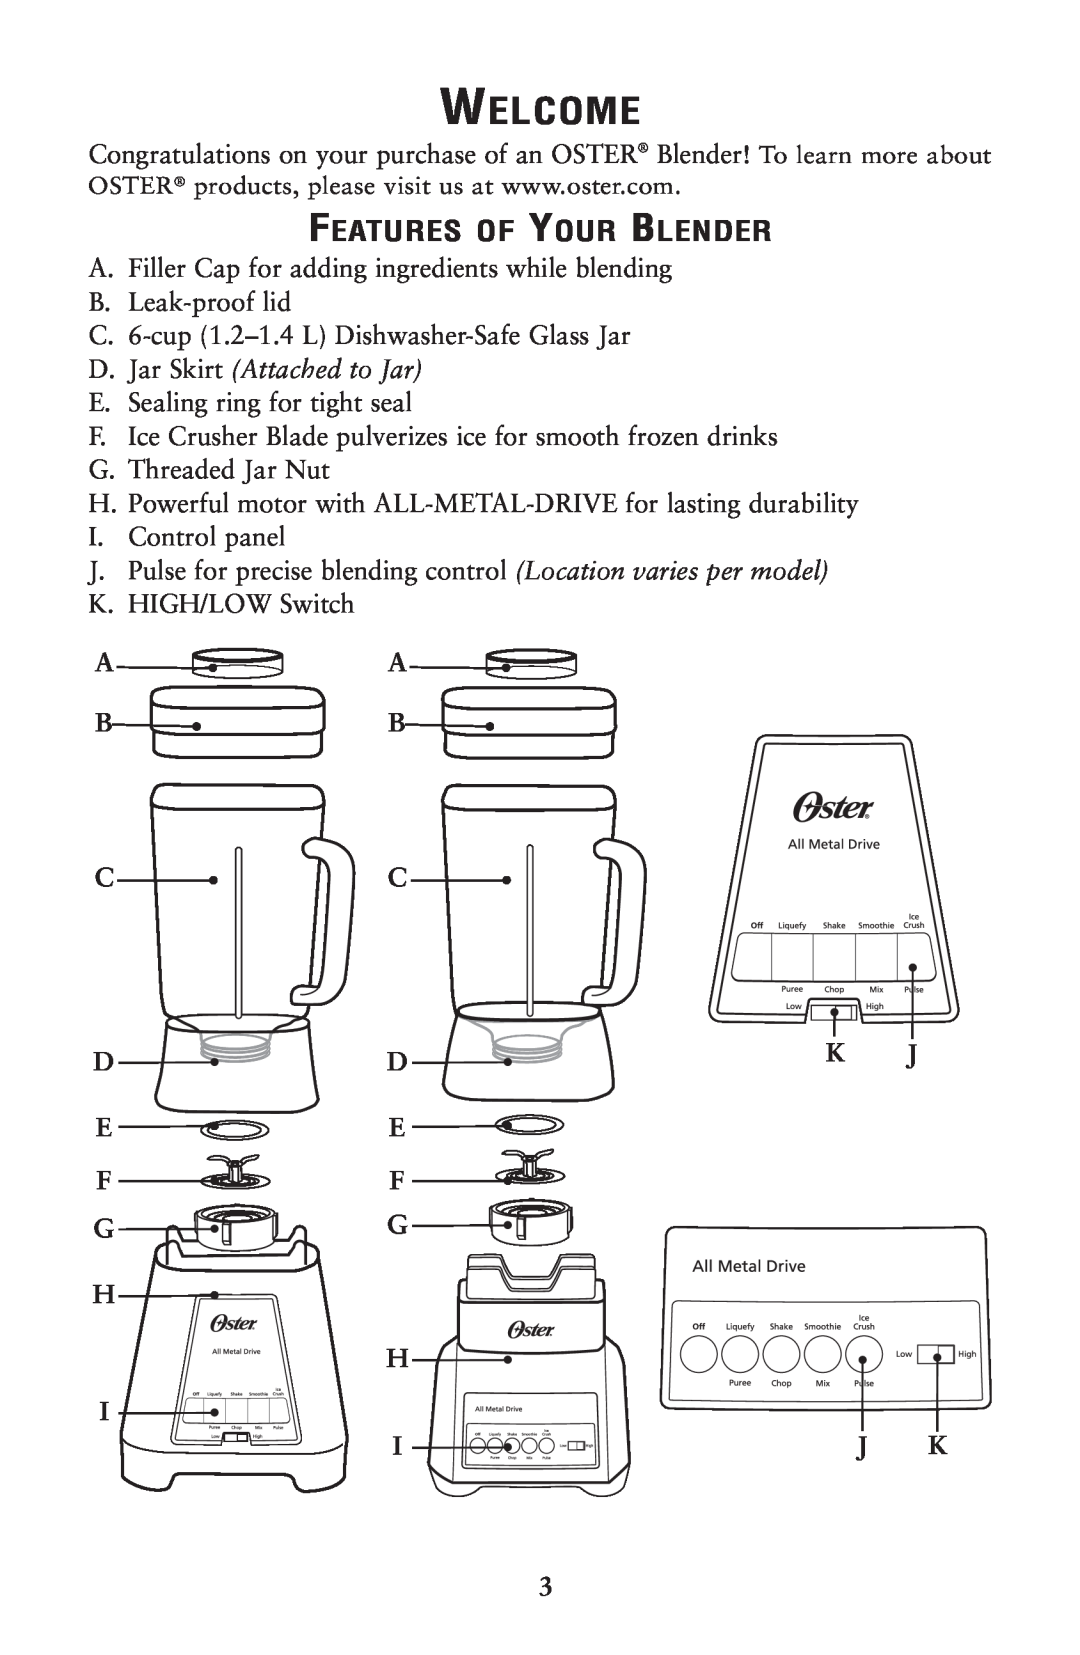 Oster P.N. 133086 user manual Welcome, D. Jar Skirt Attached to Jar, Features Of Your Blender 